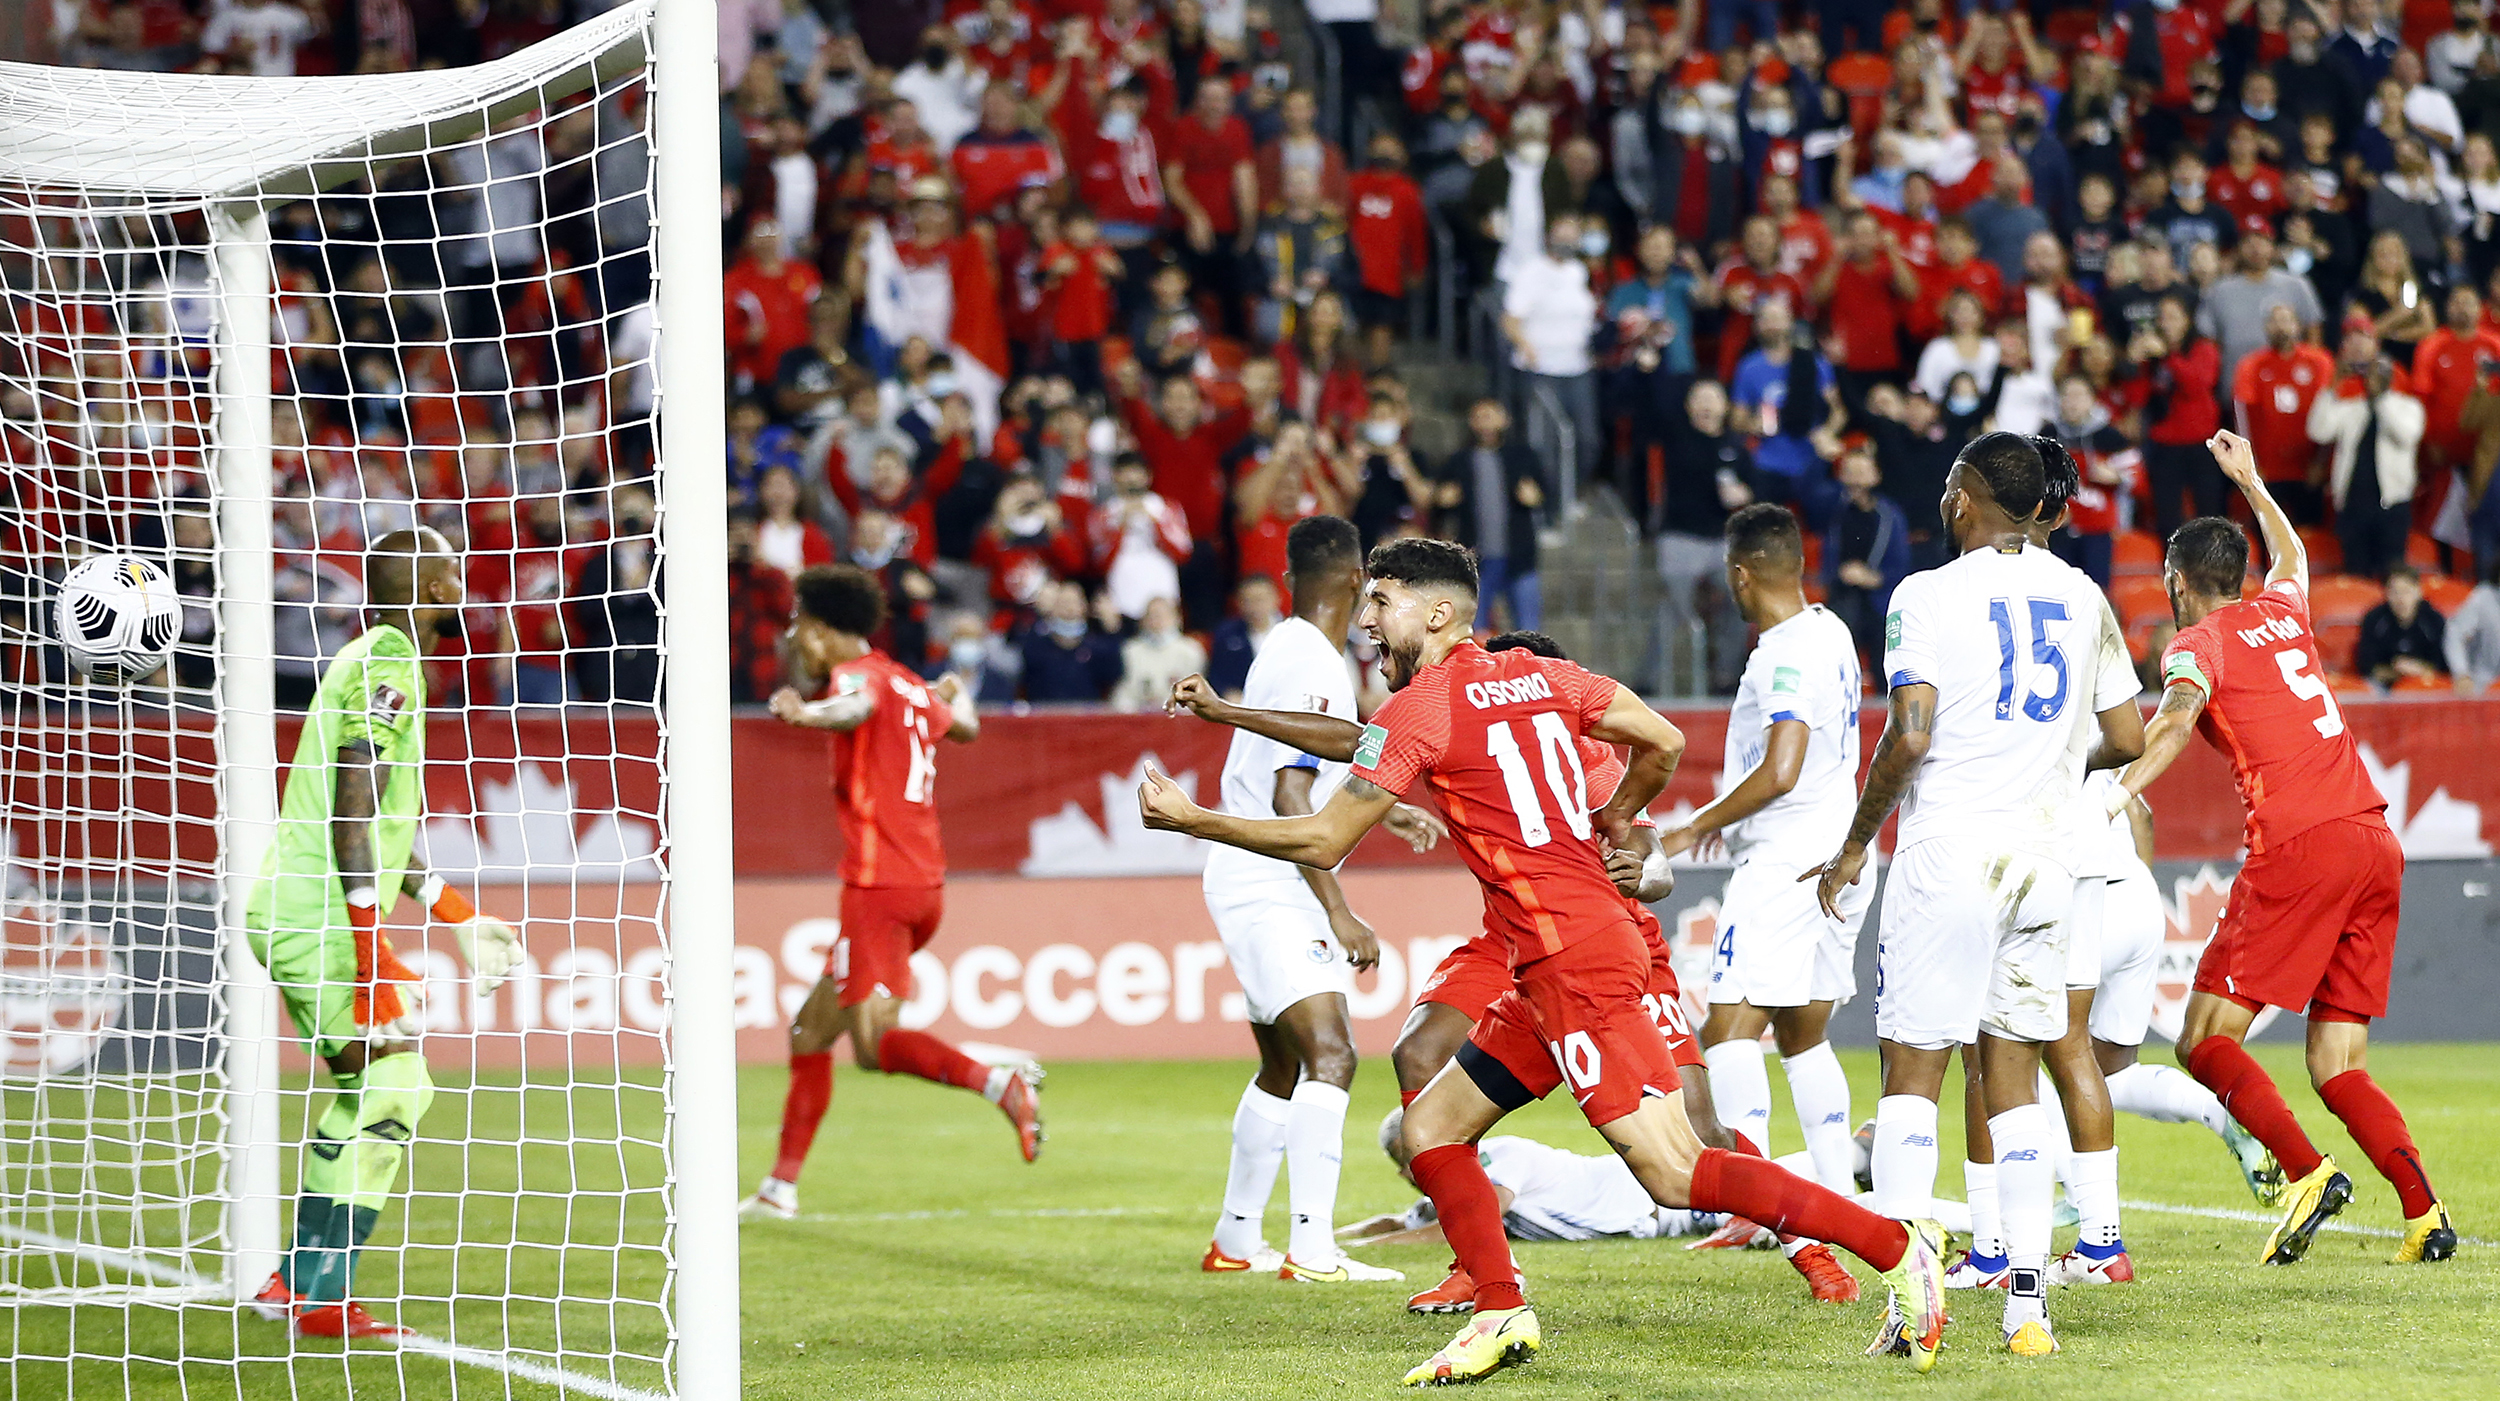 Jonathan Osorio #10 of Canada celebrates a goal by Tajon Buchanan #11 during a 2022 World Cup Qualifying match against Panama at BMO Field on October 13, 2021 in Toronto, Ontario, Canada.